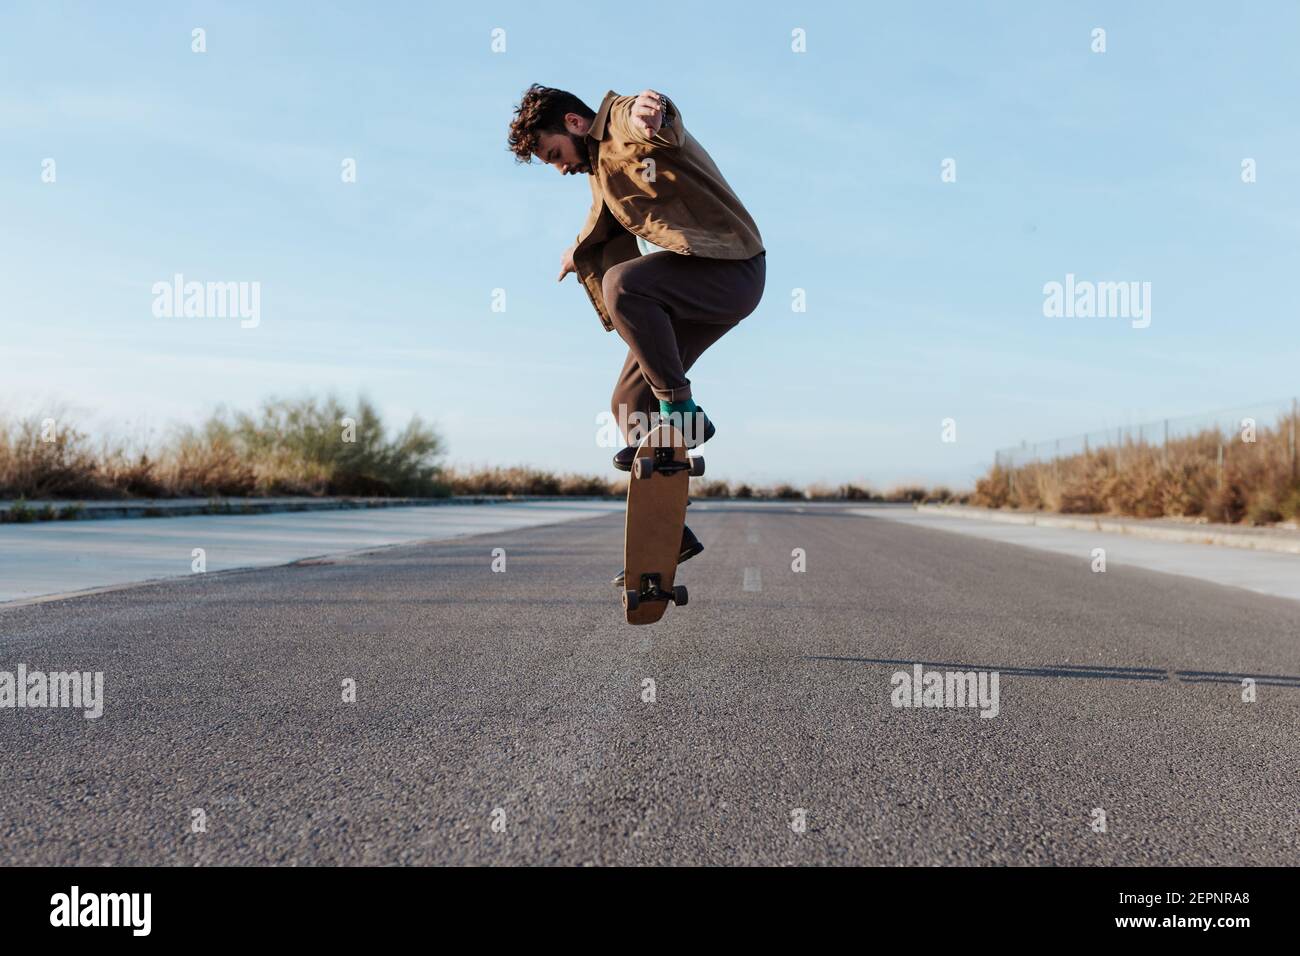 Full body young bearded skater in casual outfit jumping while performing kickflip on skateboard on asphalt road Stock Photo